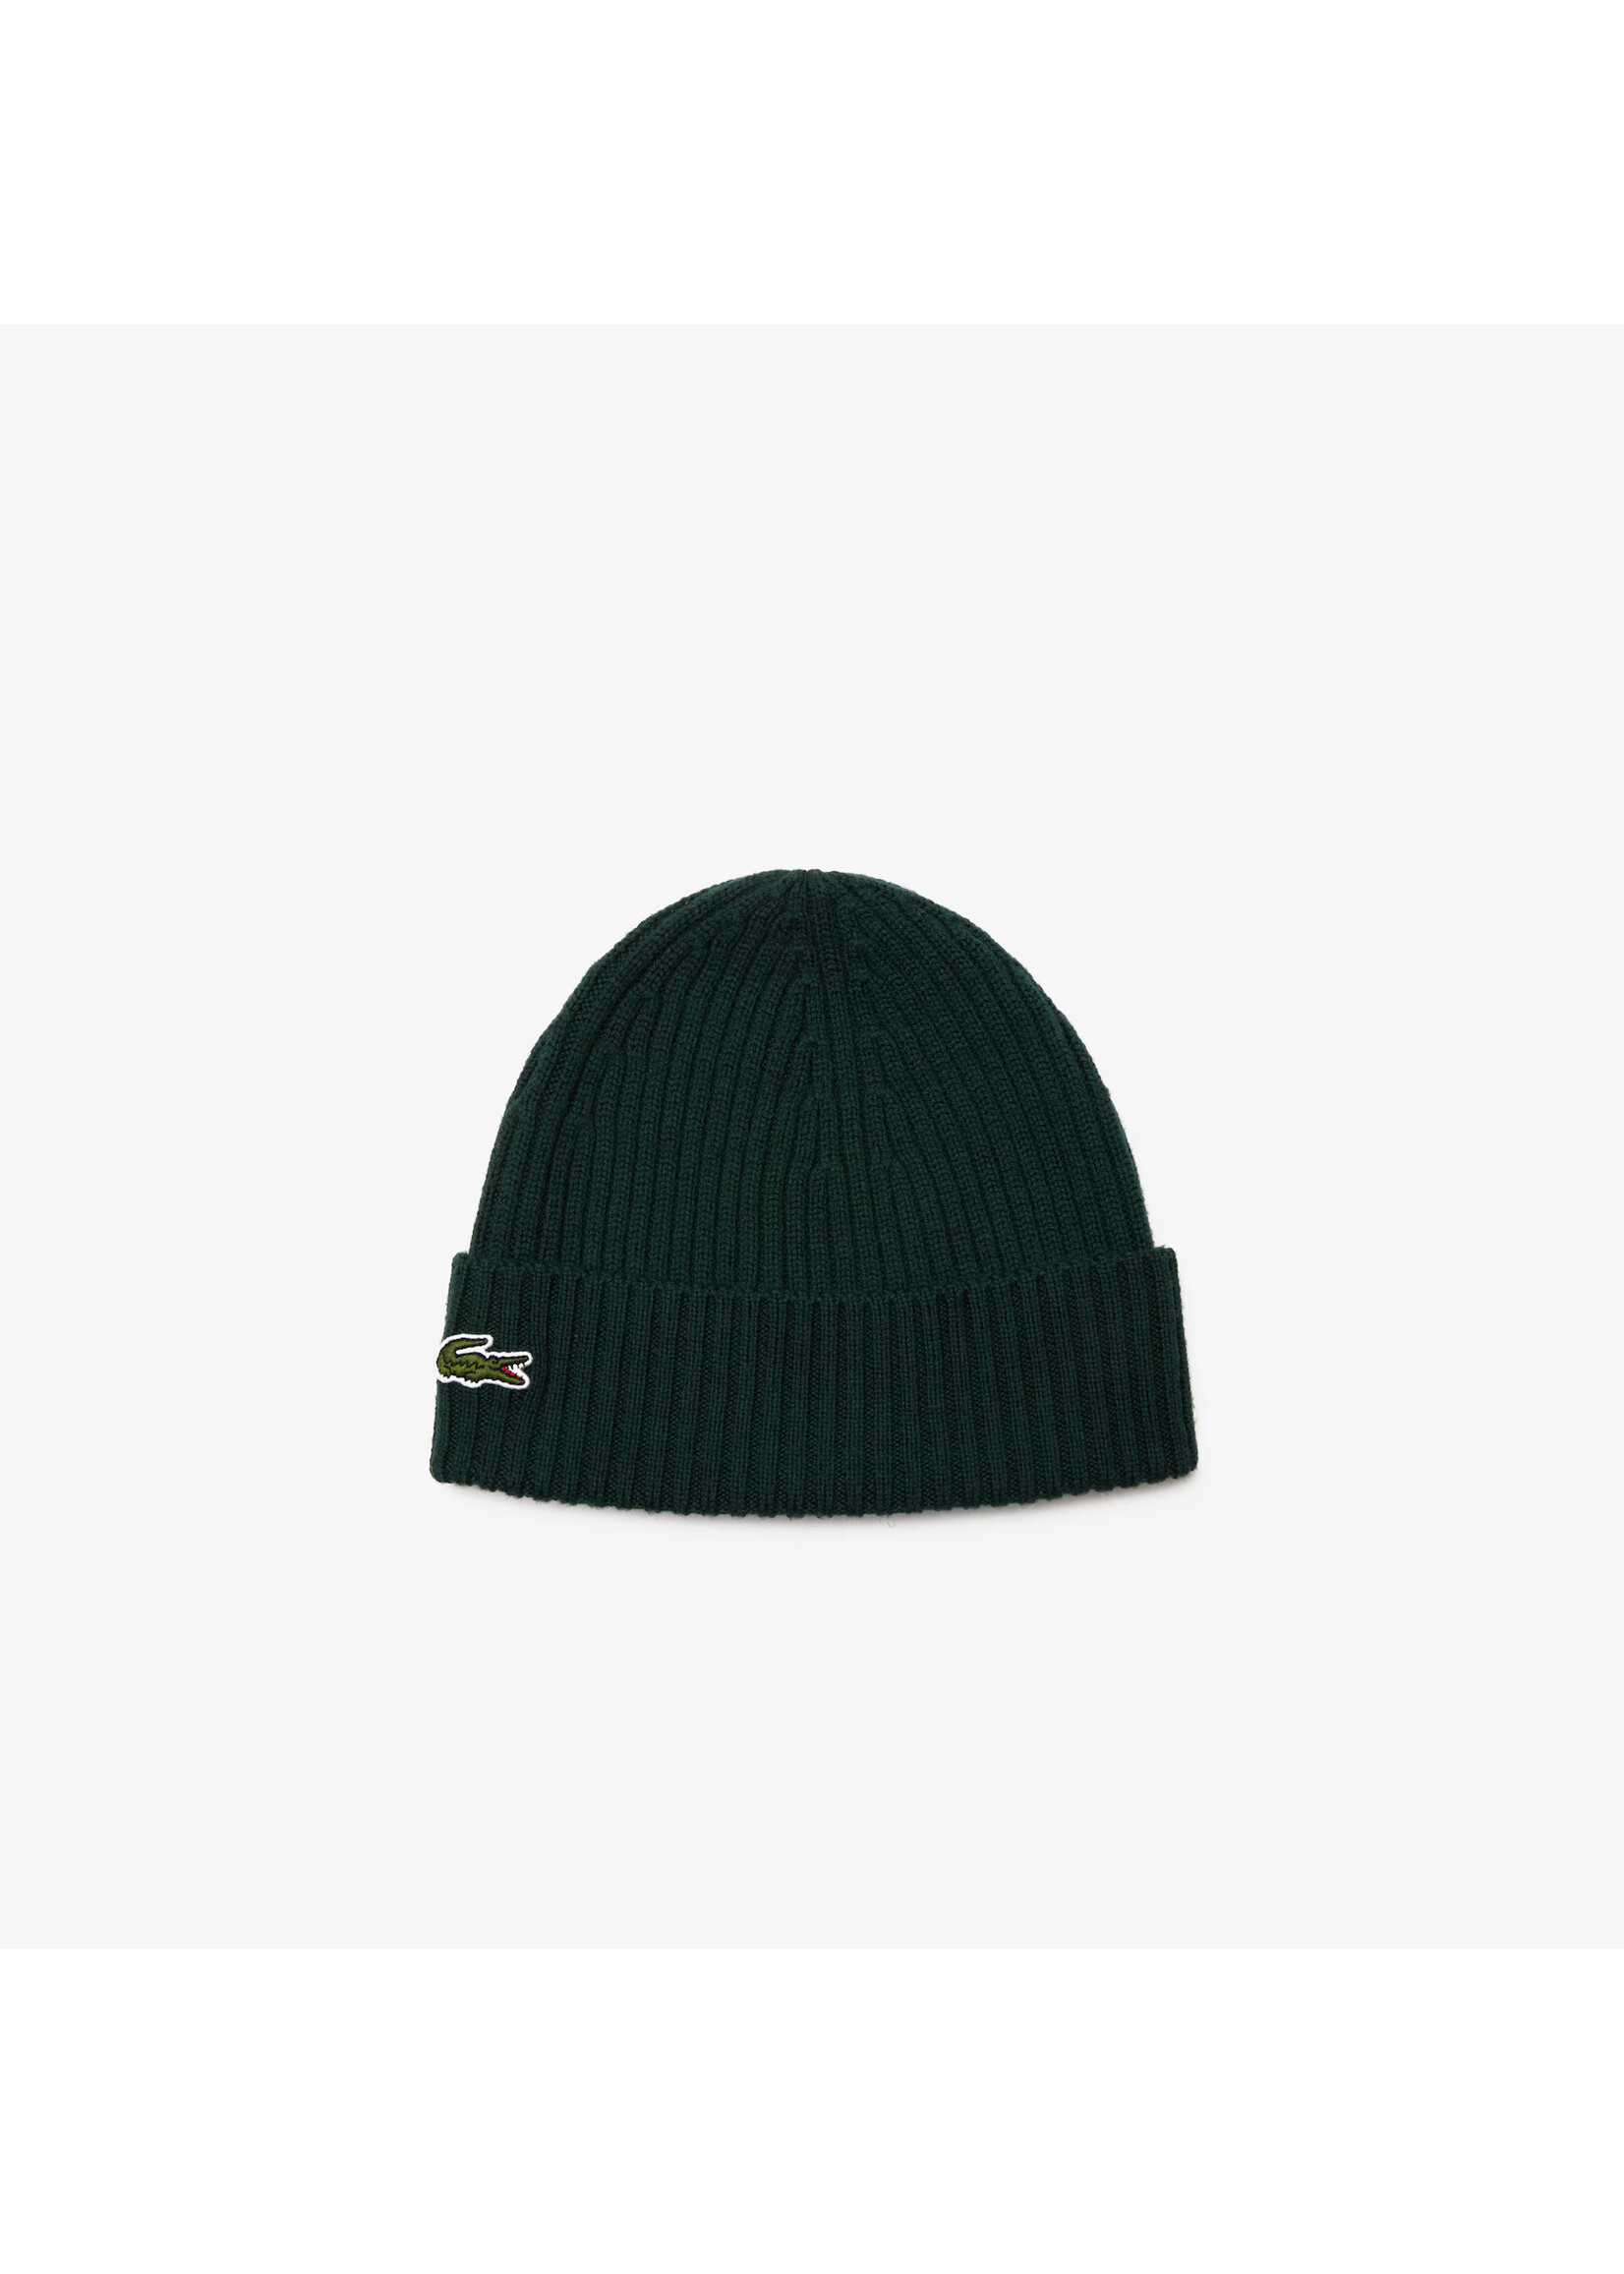 Lacoste Knitted Beanie